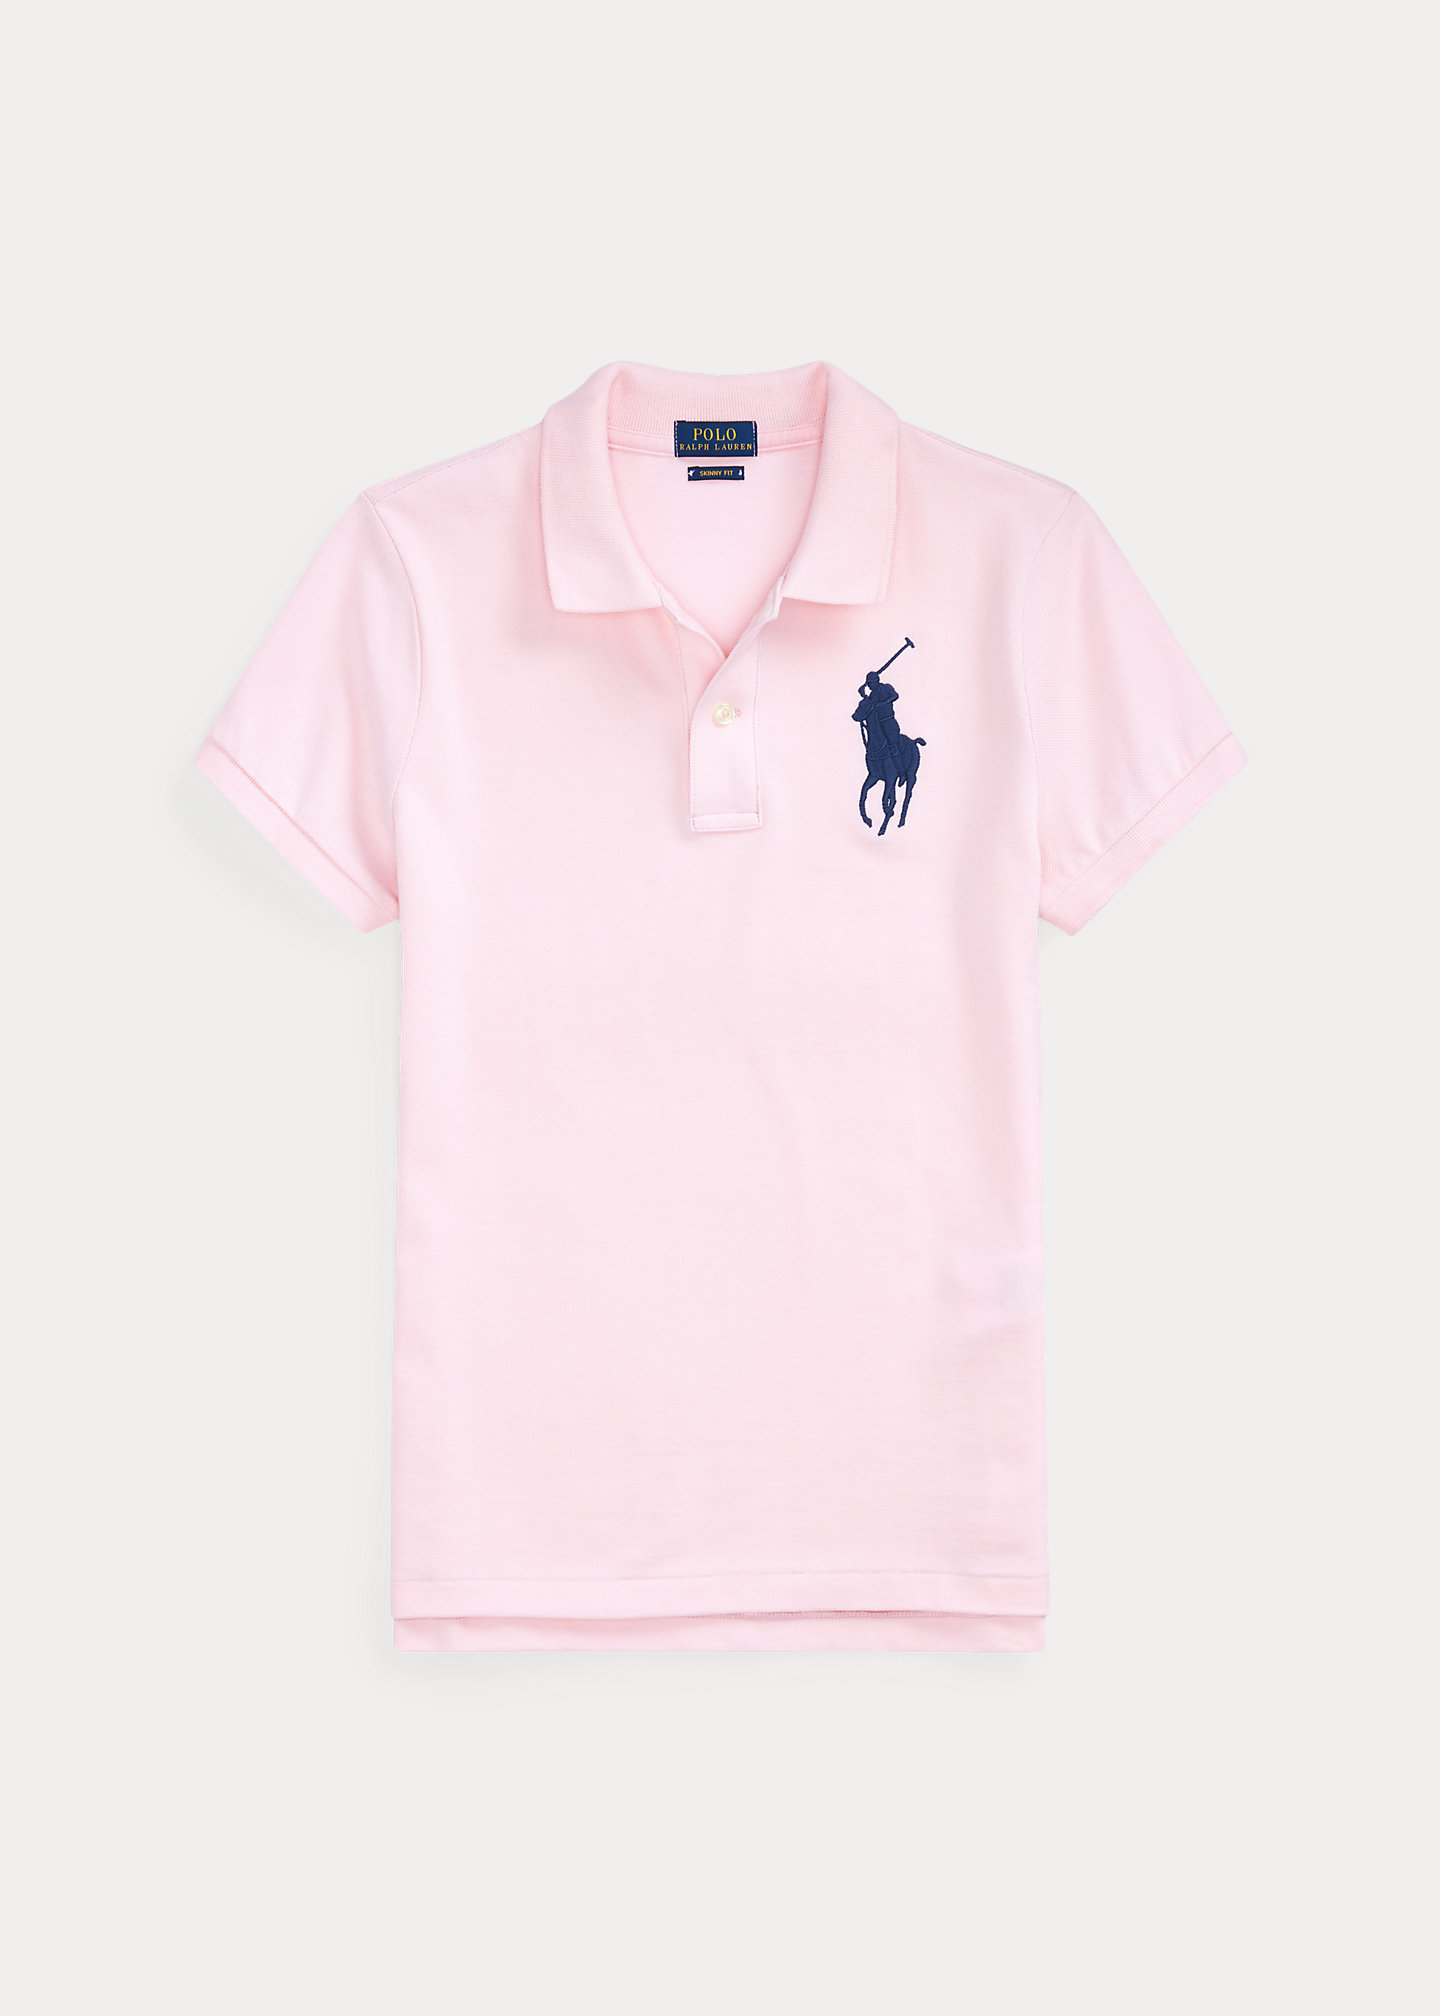 Polo Ralph Lauren - Ghana : New ,Used Goods & Products !